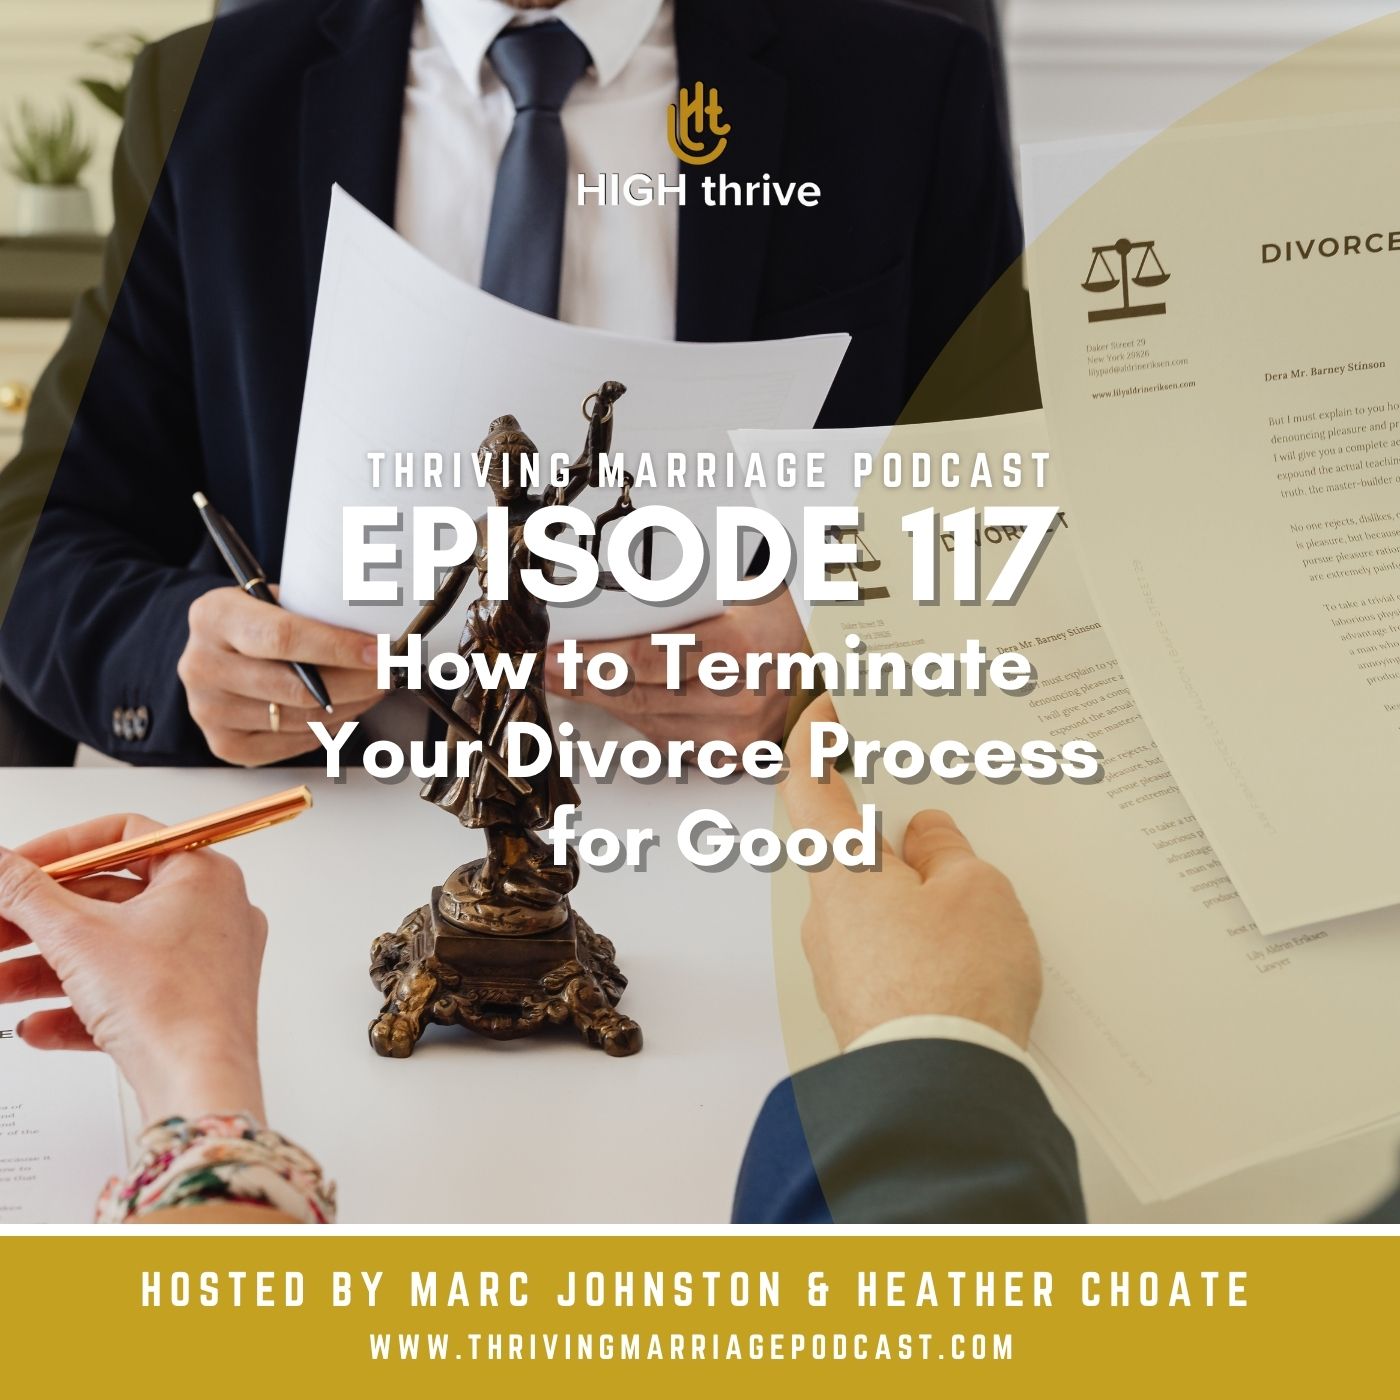 Episode 117: How to Terminate Your Divorce Process for Good